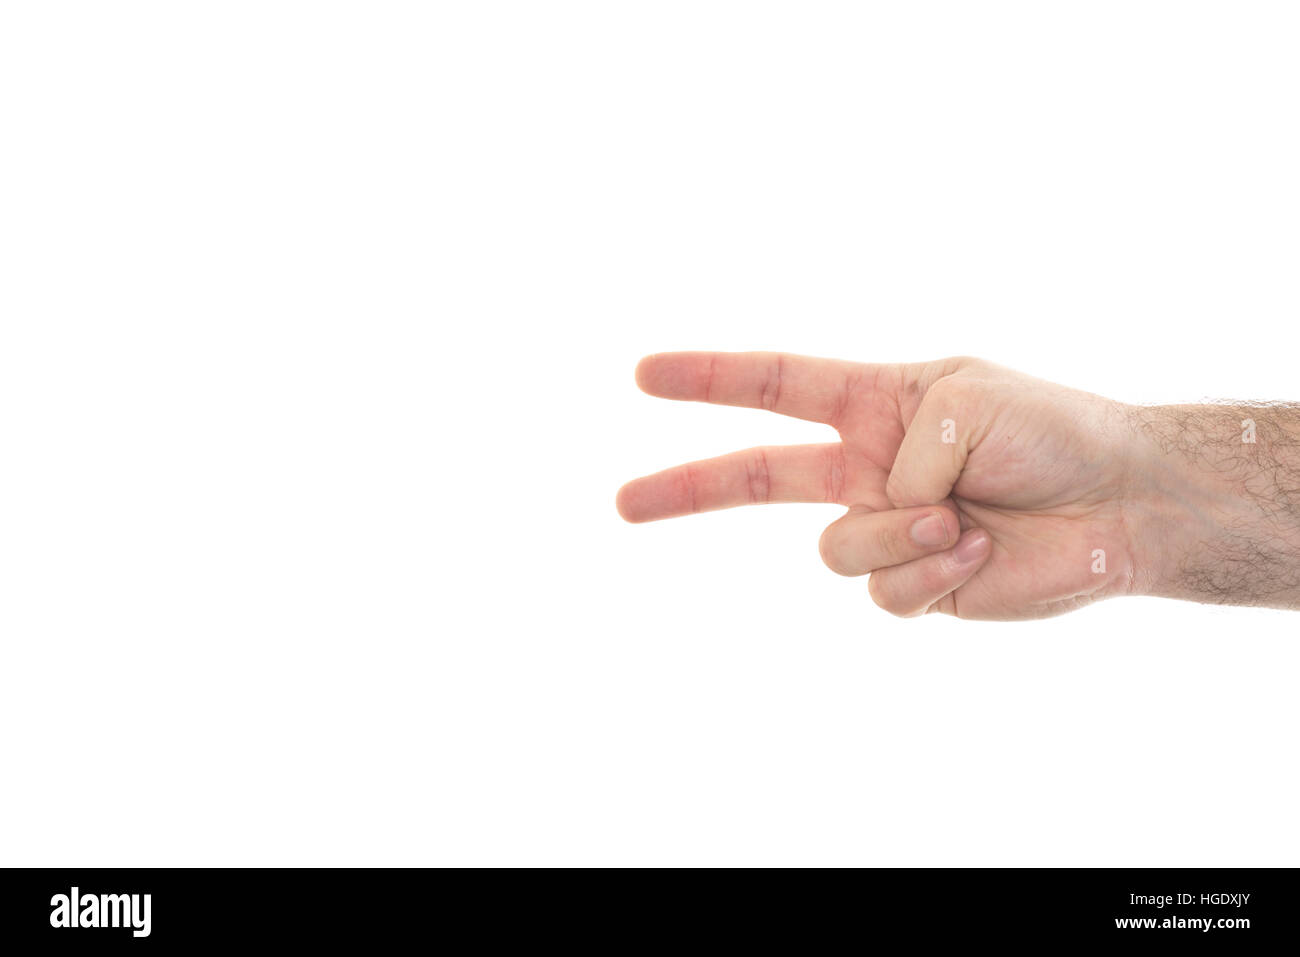 Hand showing two fingers for counting and indicating numbers. Horizontal Stock Photo